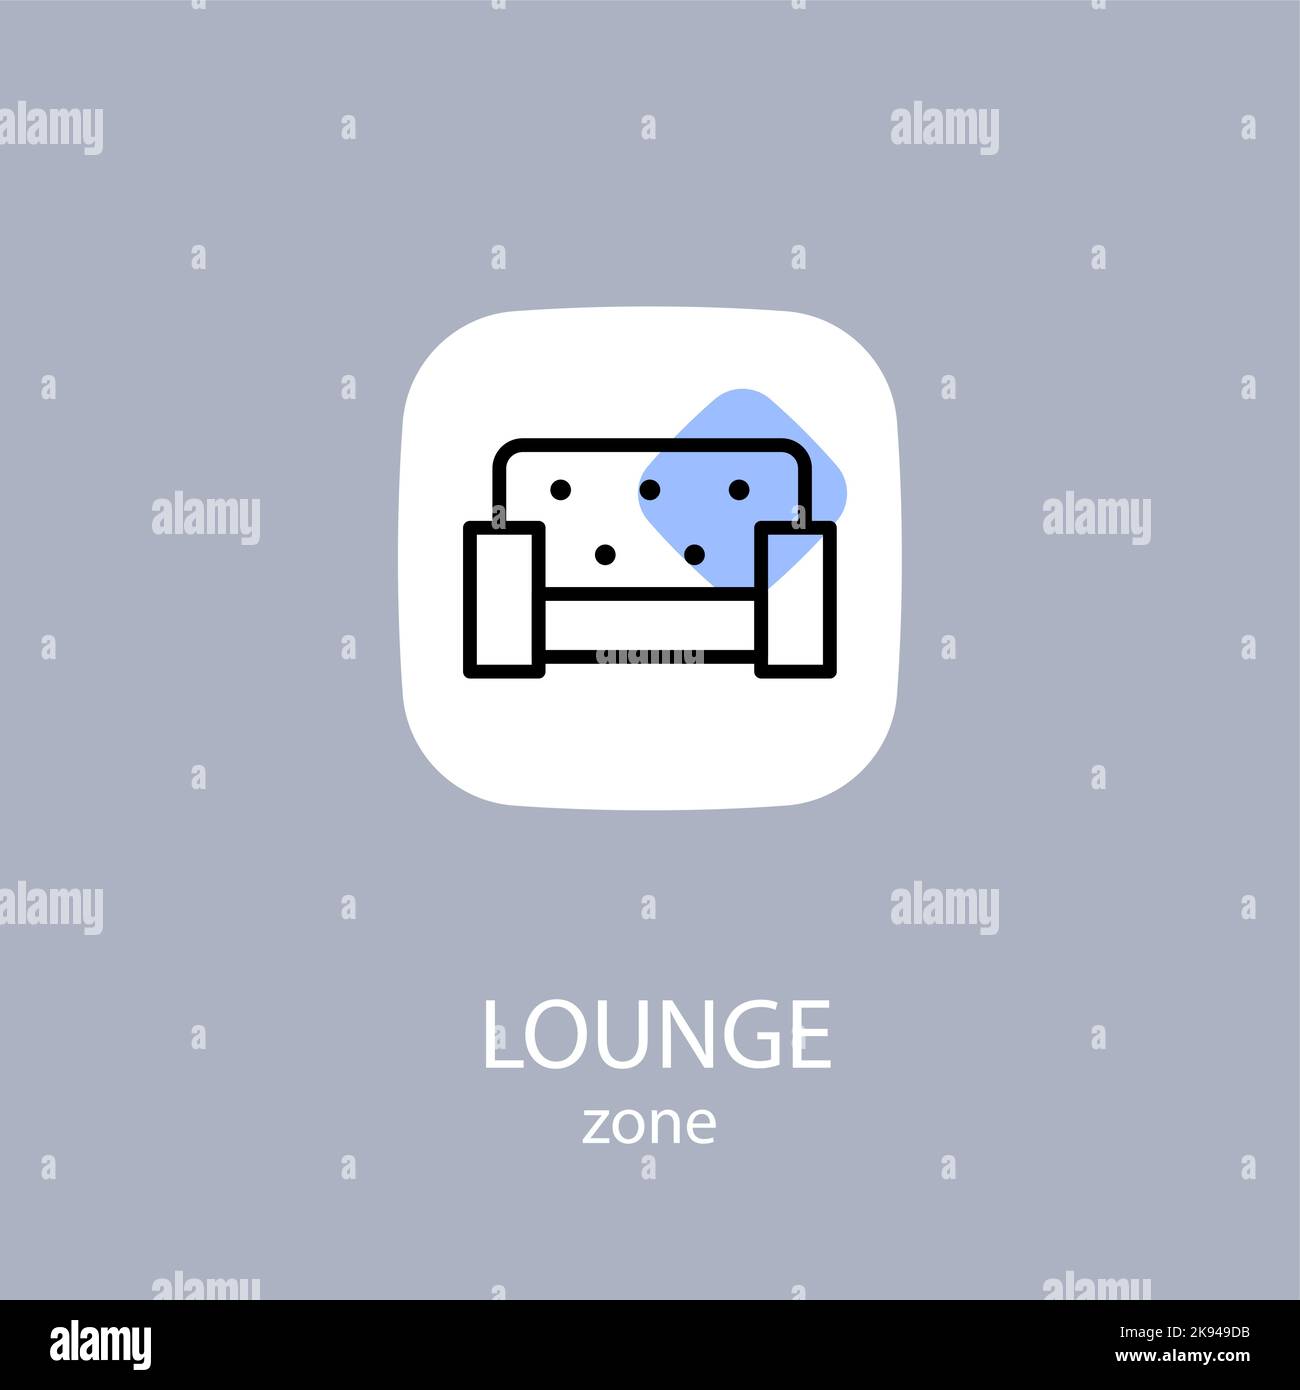 Simple Sofa Icon in Line Art Style. Outline Pictogram of Comfortable Couch in Lounge Area. Lounge Concept Icon. Luxury Class Waiting Room Idea Thin Li Stock Vector